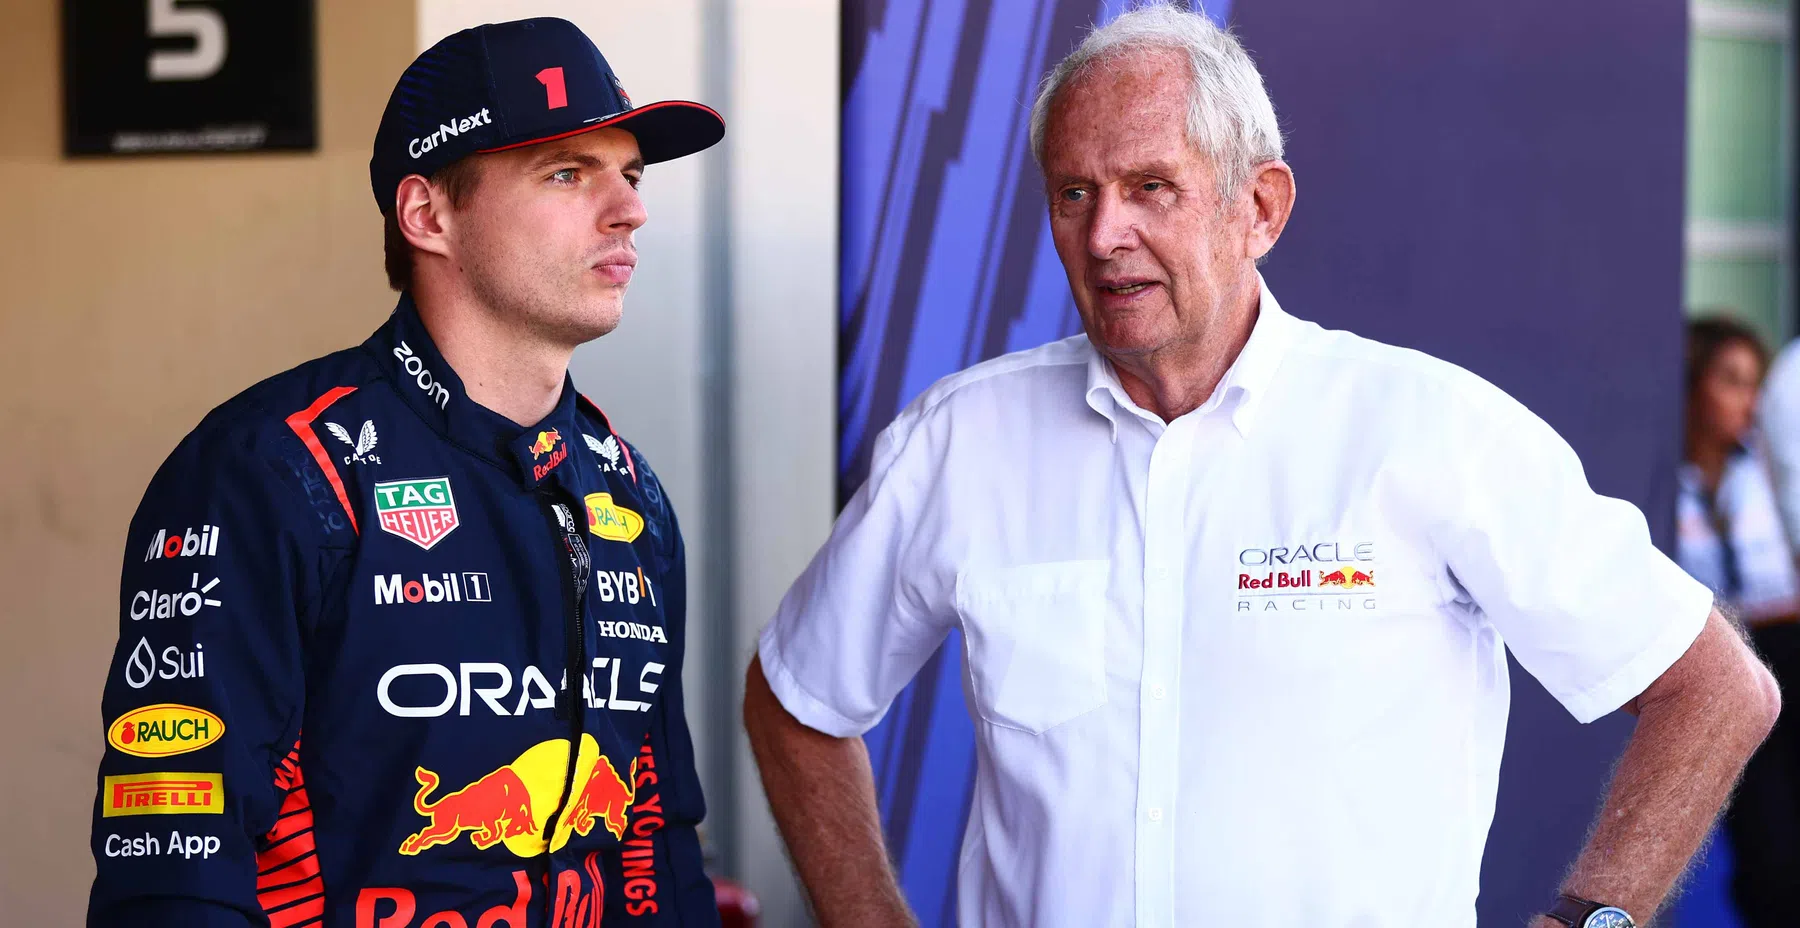 Max Verstappen talks about his bond with Helmut Marko